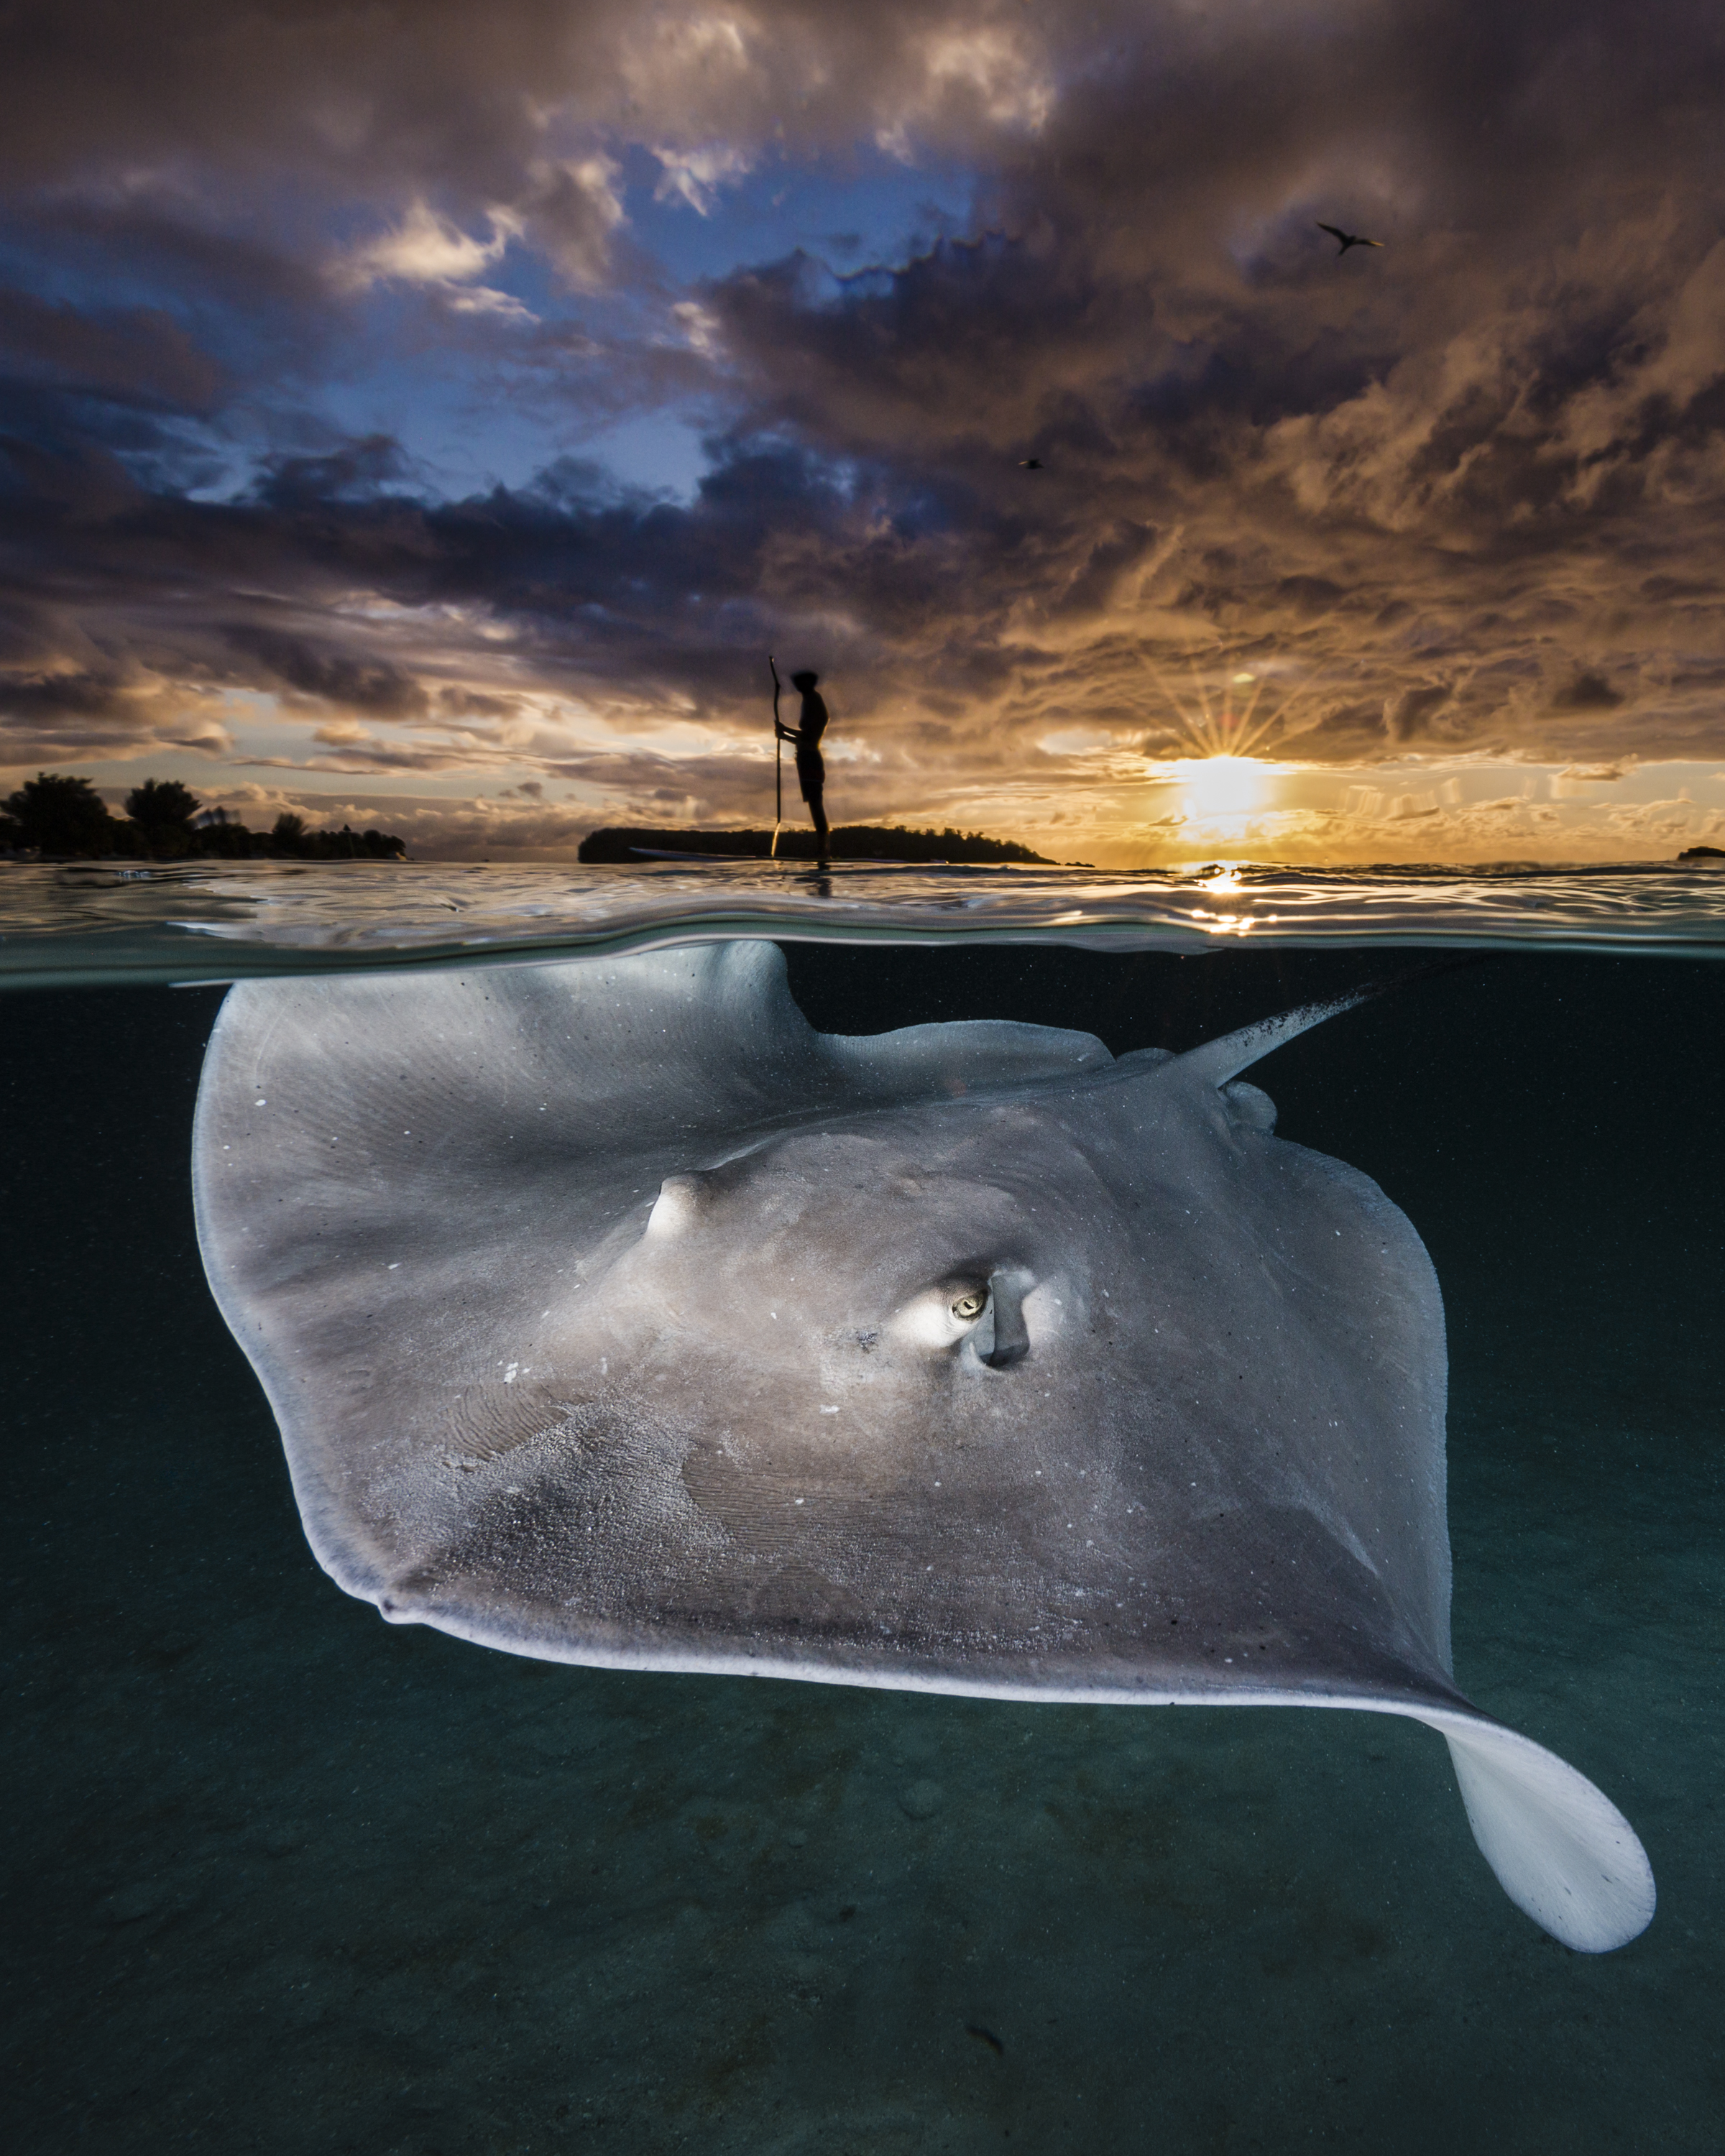 Ocean Photographer of the Year